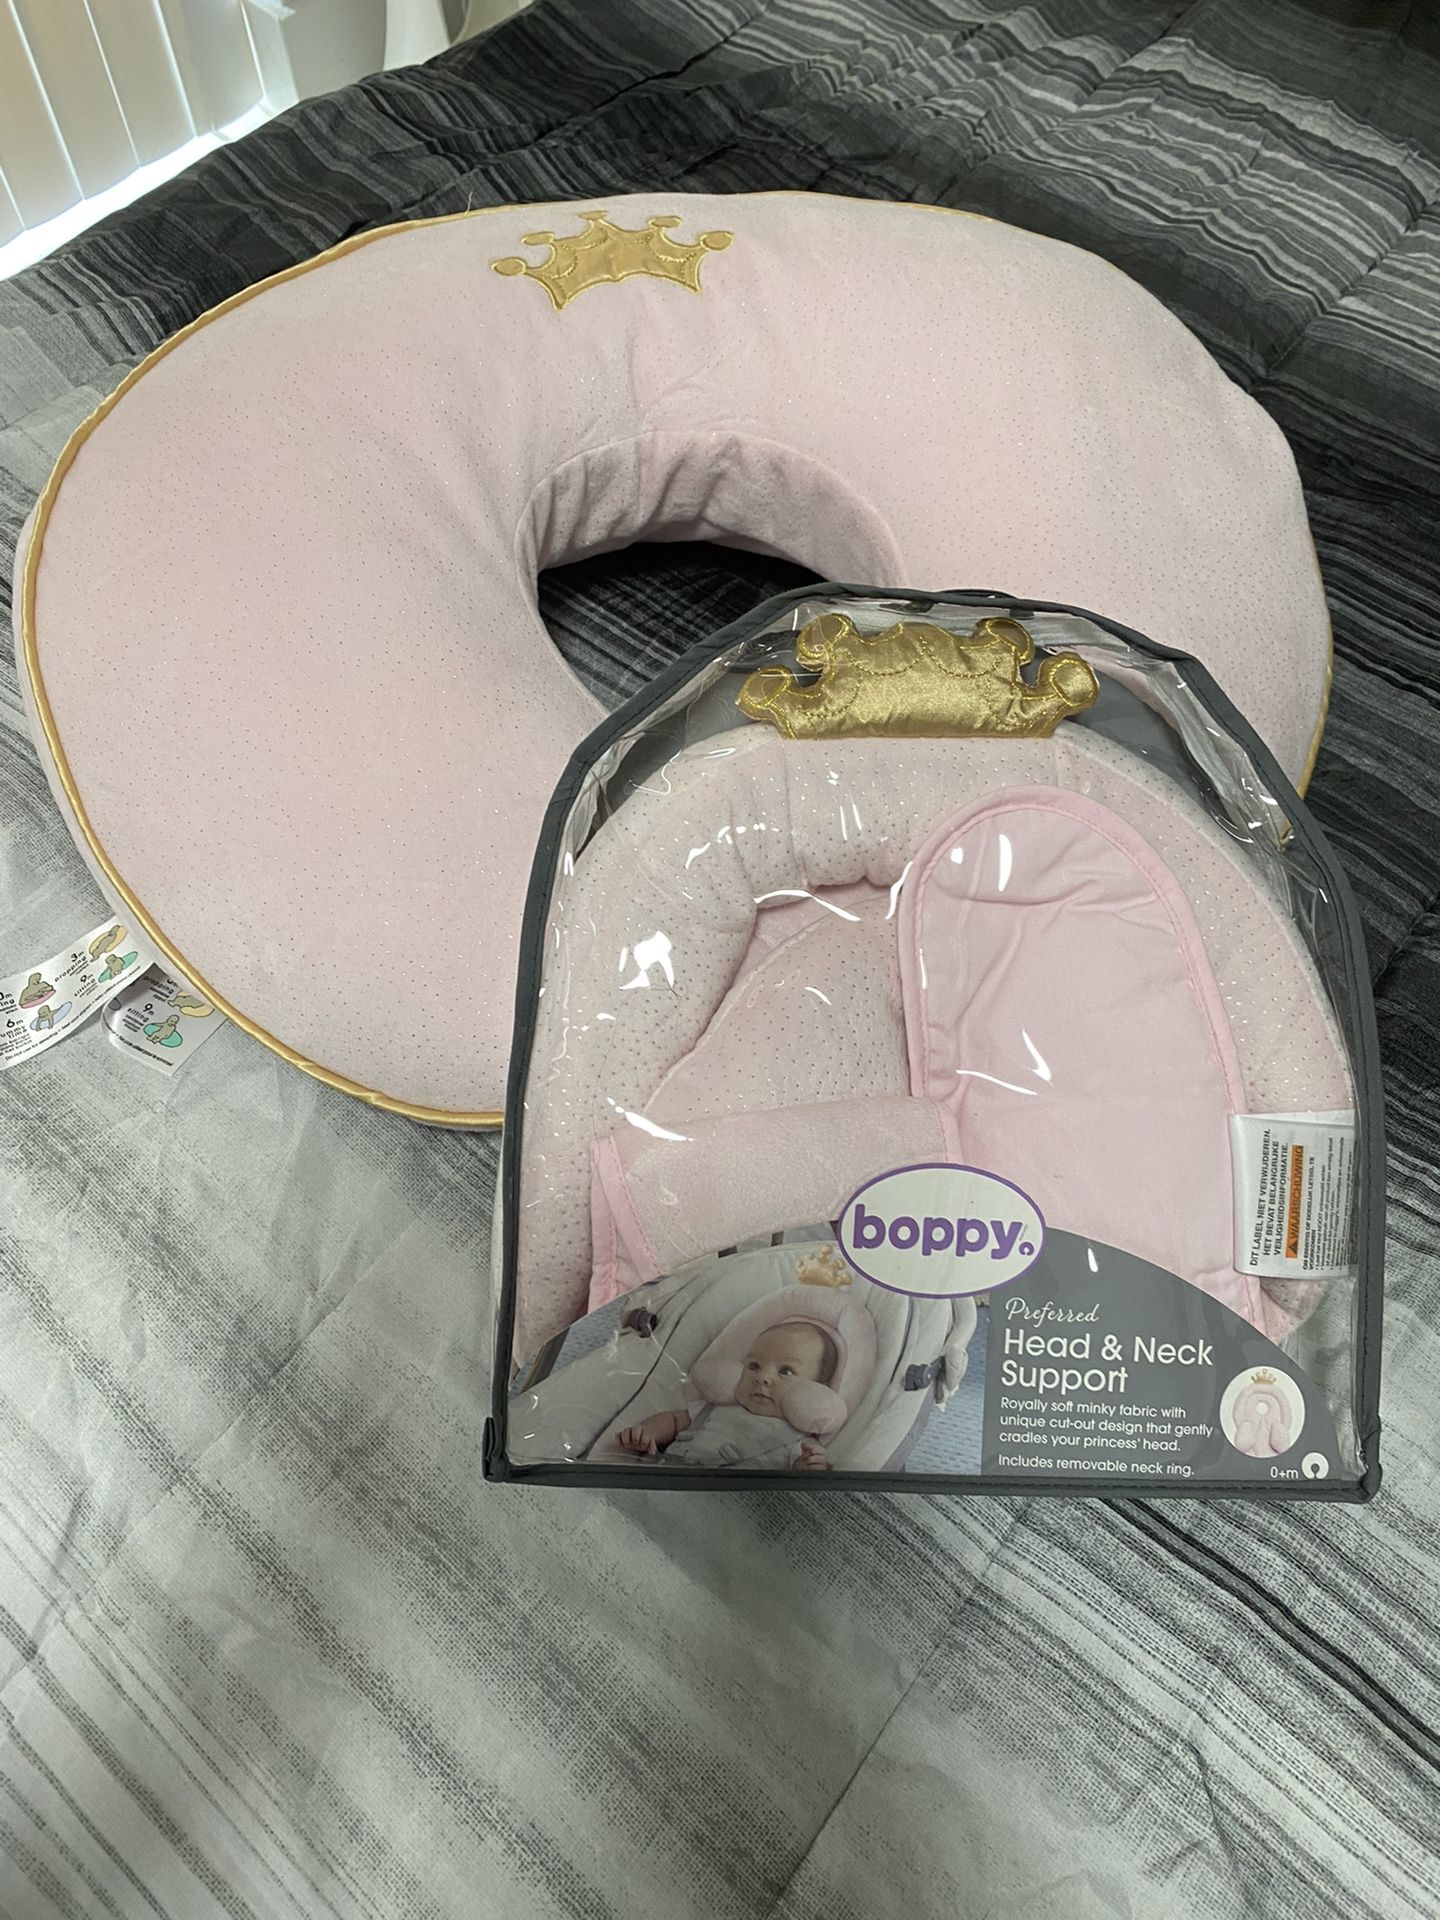 Boppy Nursing Pillow And Head and neck support in pink